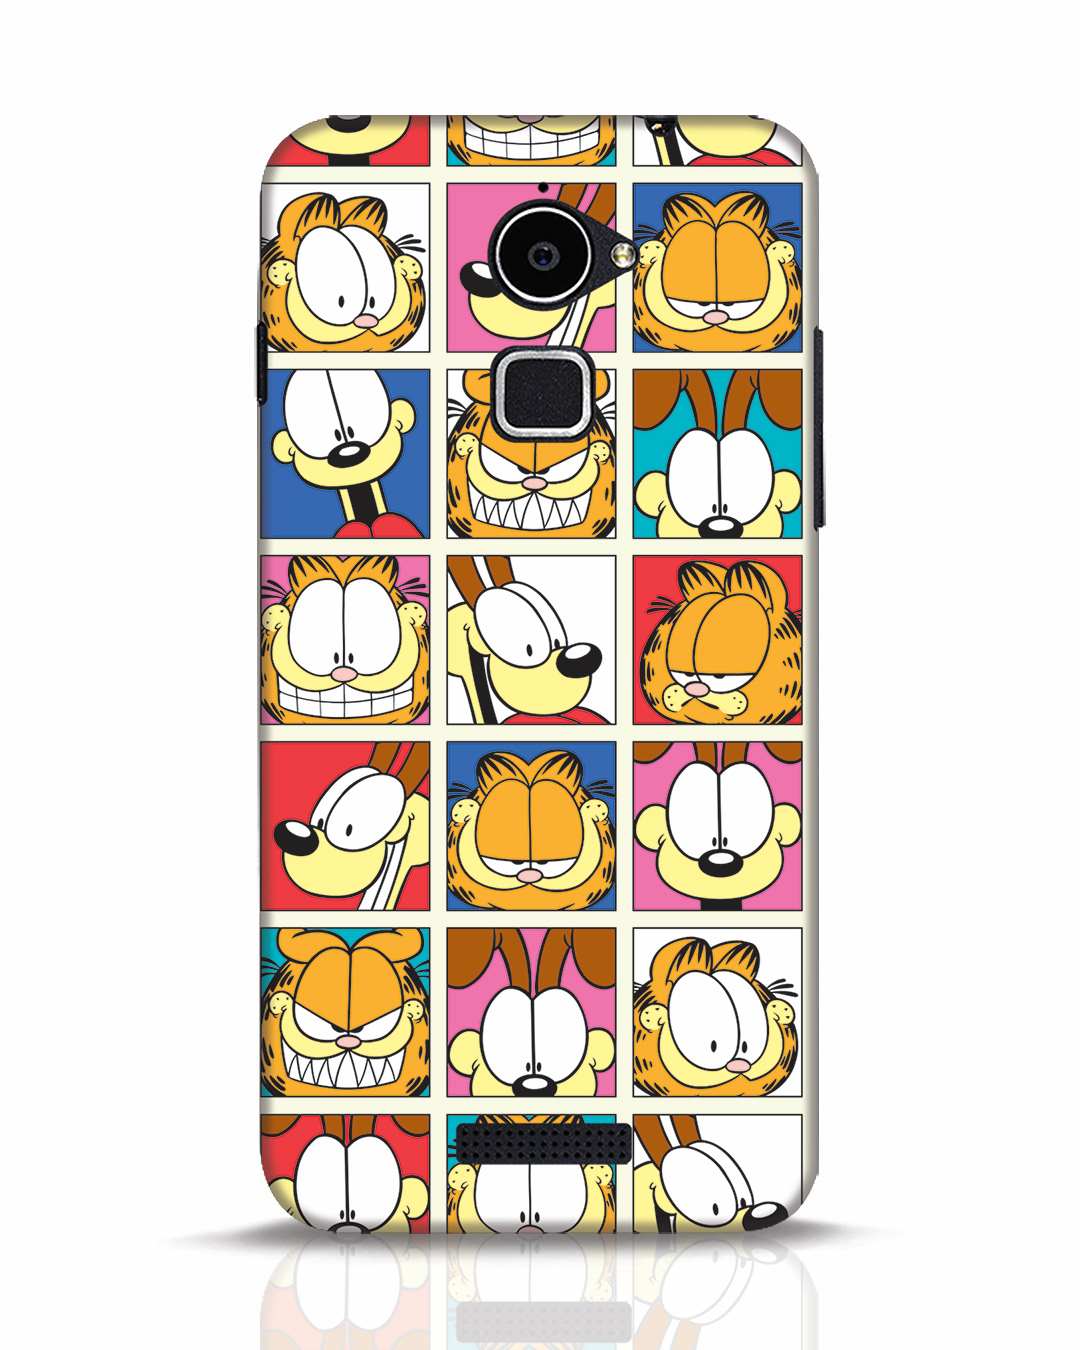 Garfield Charecter Faces Coolpad Note 3 Lite Mobile Cover Coolpad Note 3 Lite Mobile Covers Bewakoof.com